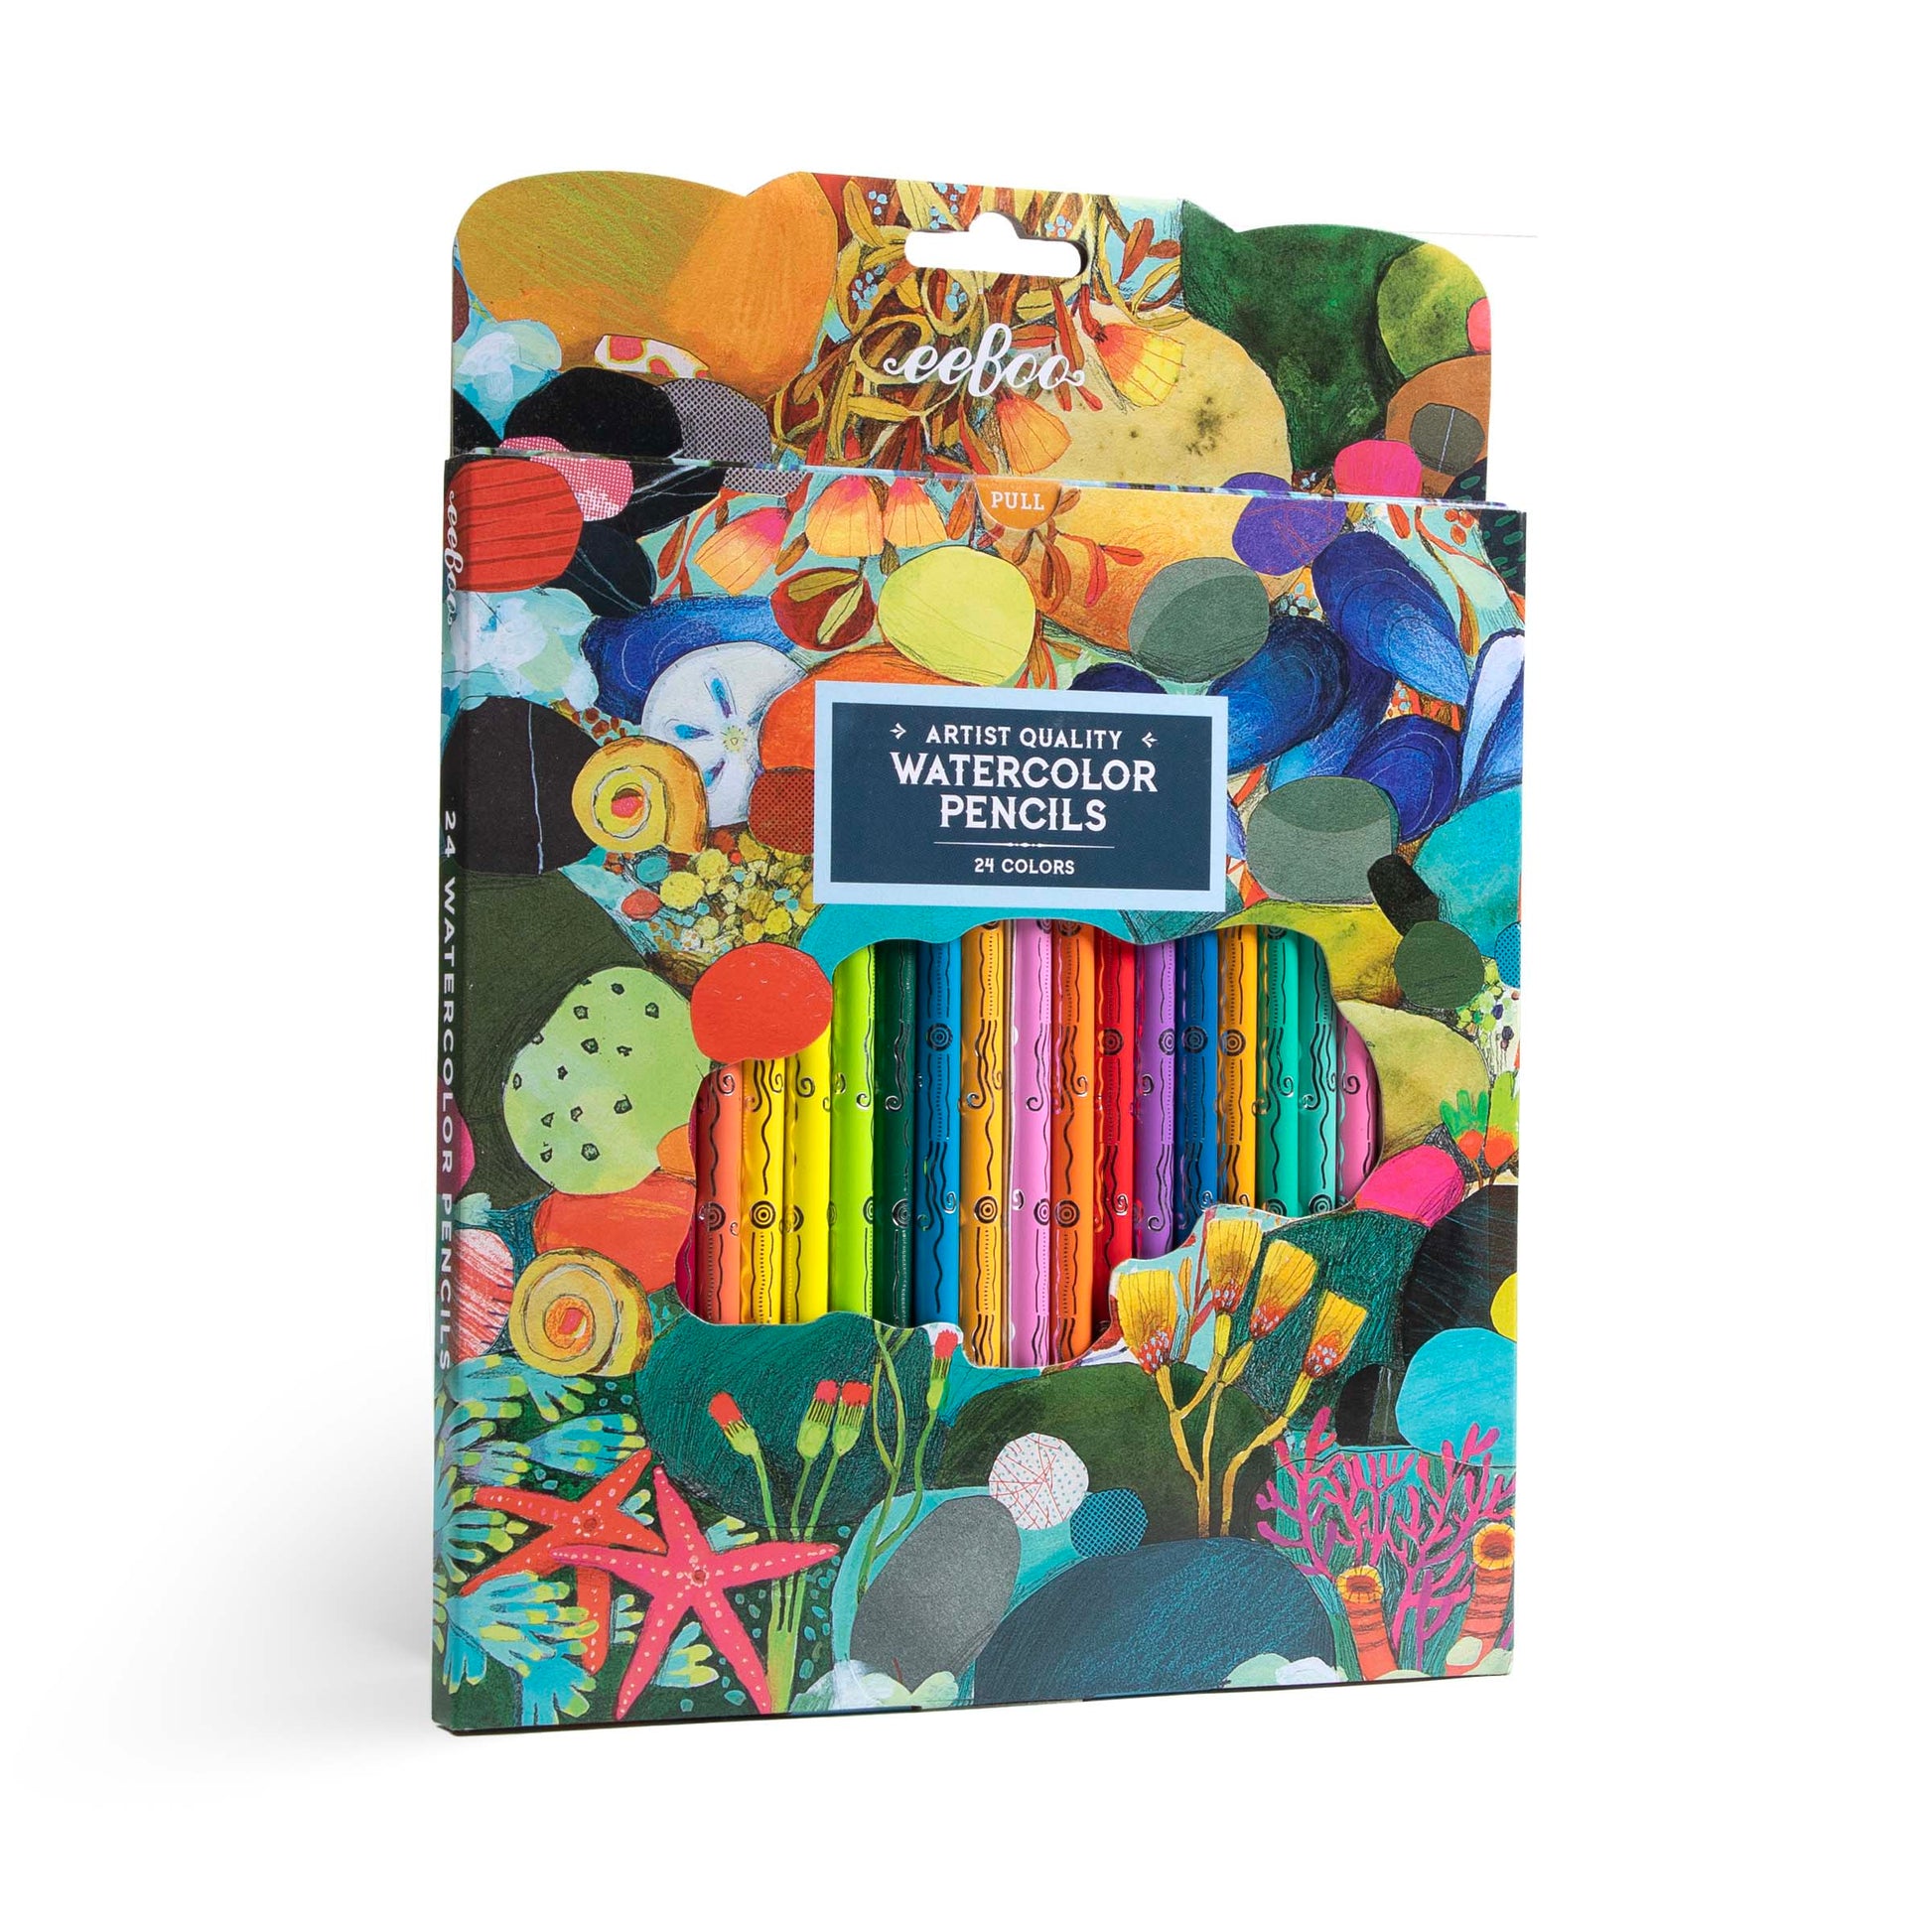 Tidepool 24 Watercolor Pencils | Unique Great Gifts for Kids & Adults 